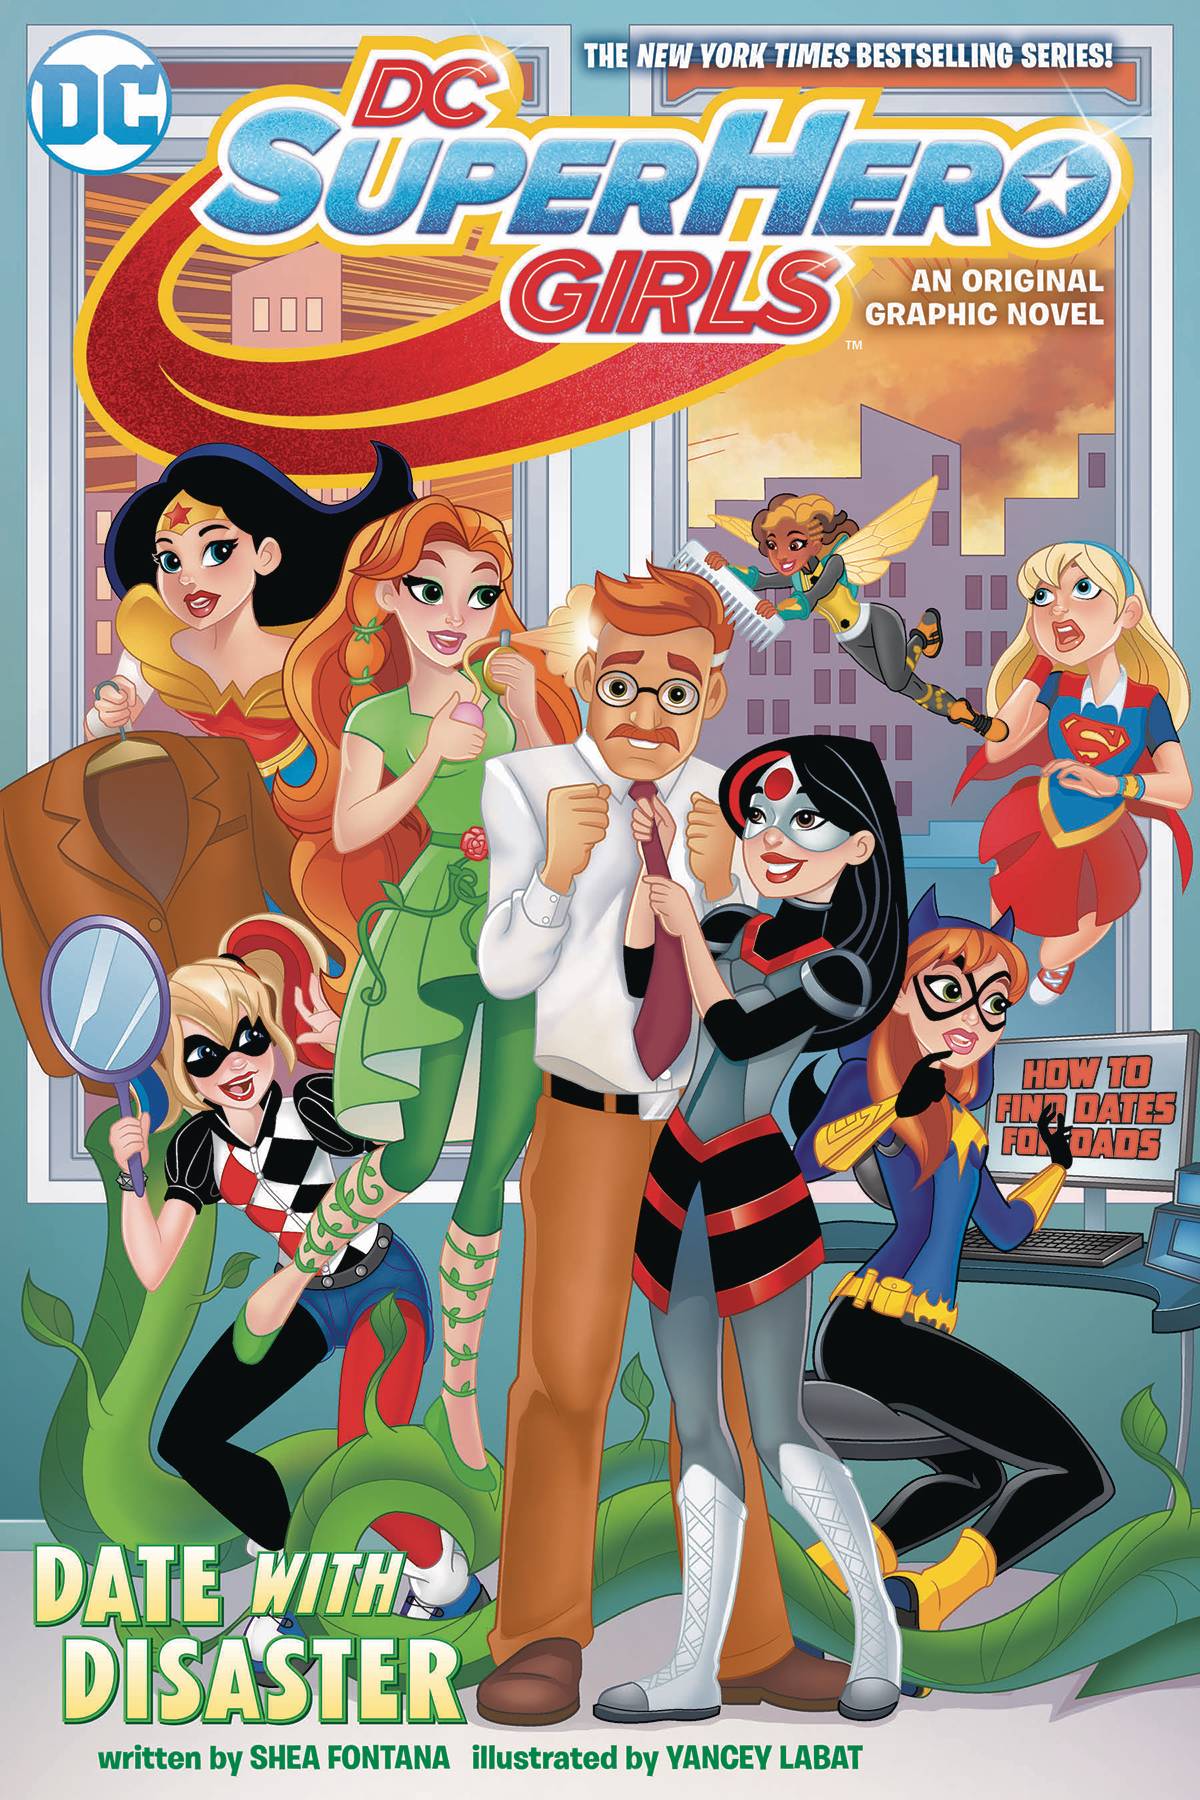 Dc Super Hero Girls Graphic Novel Volume 5 Date With Disaster Comichub